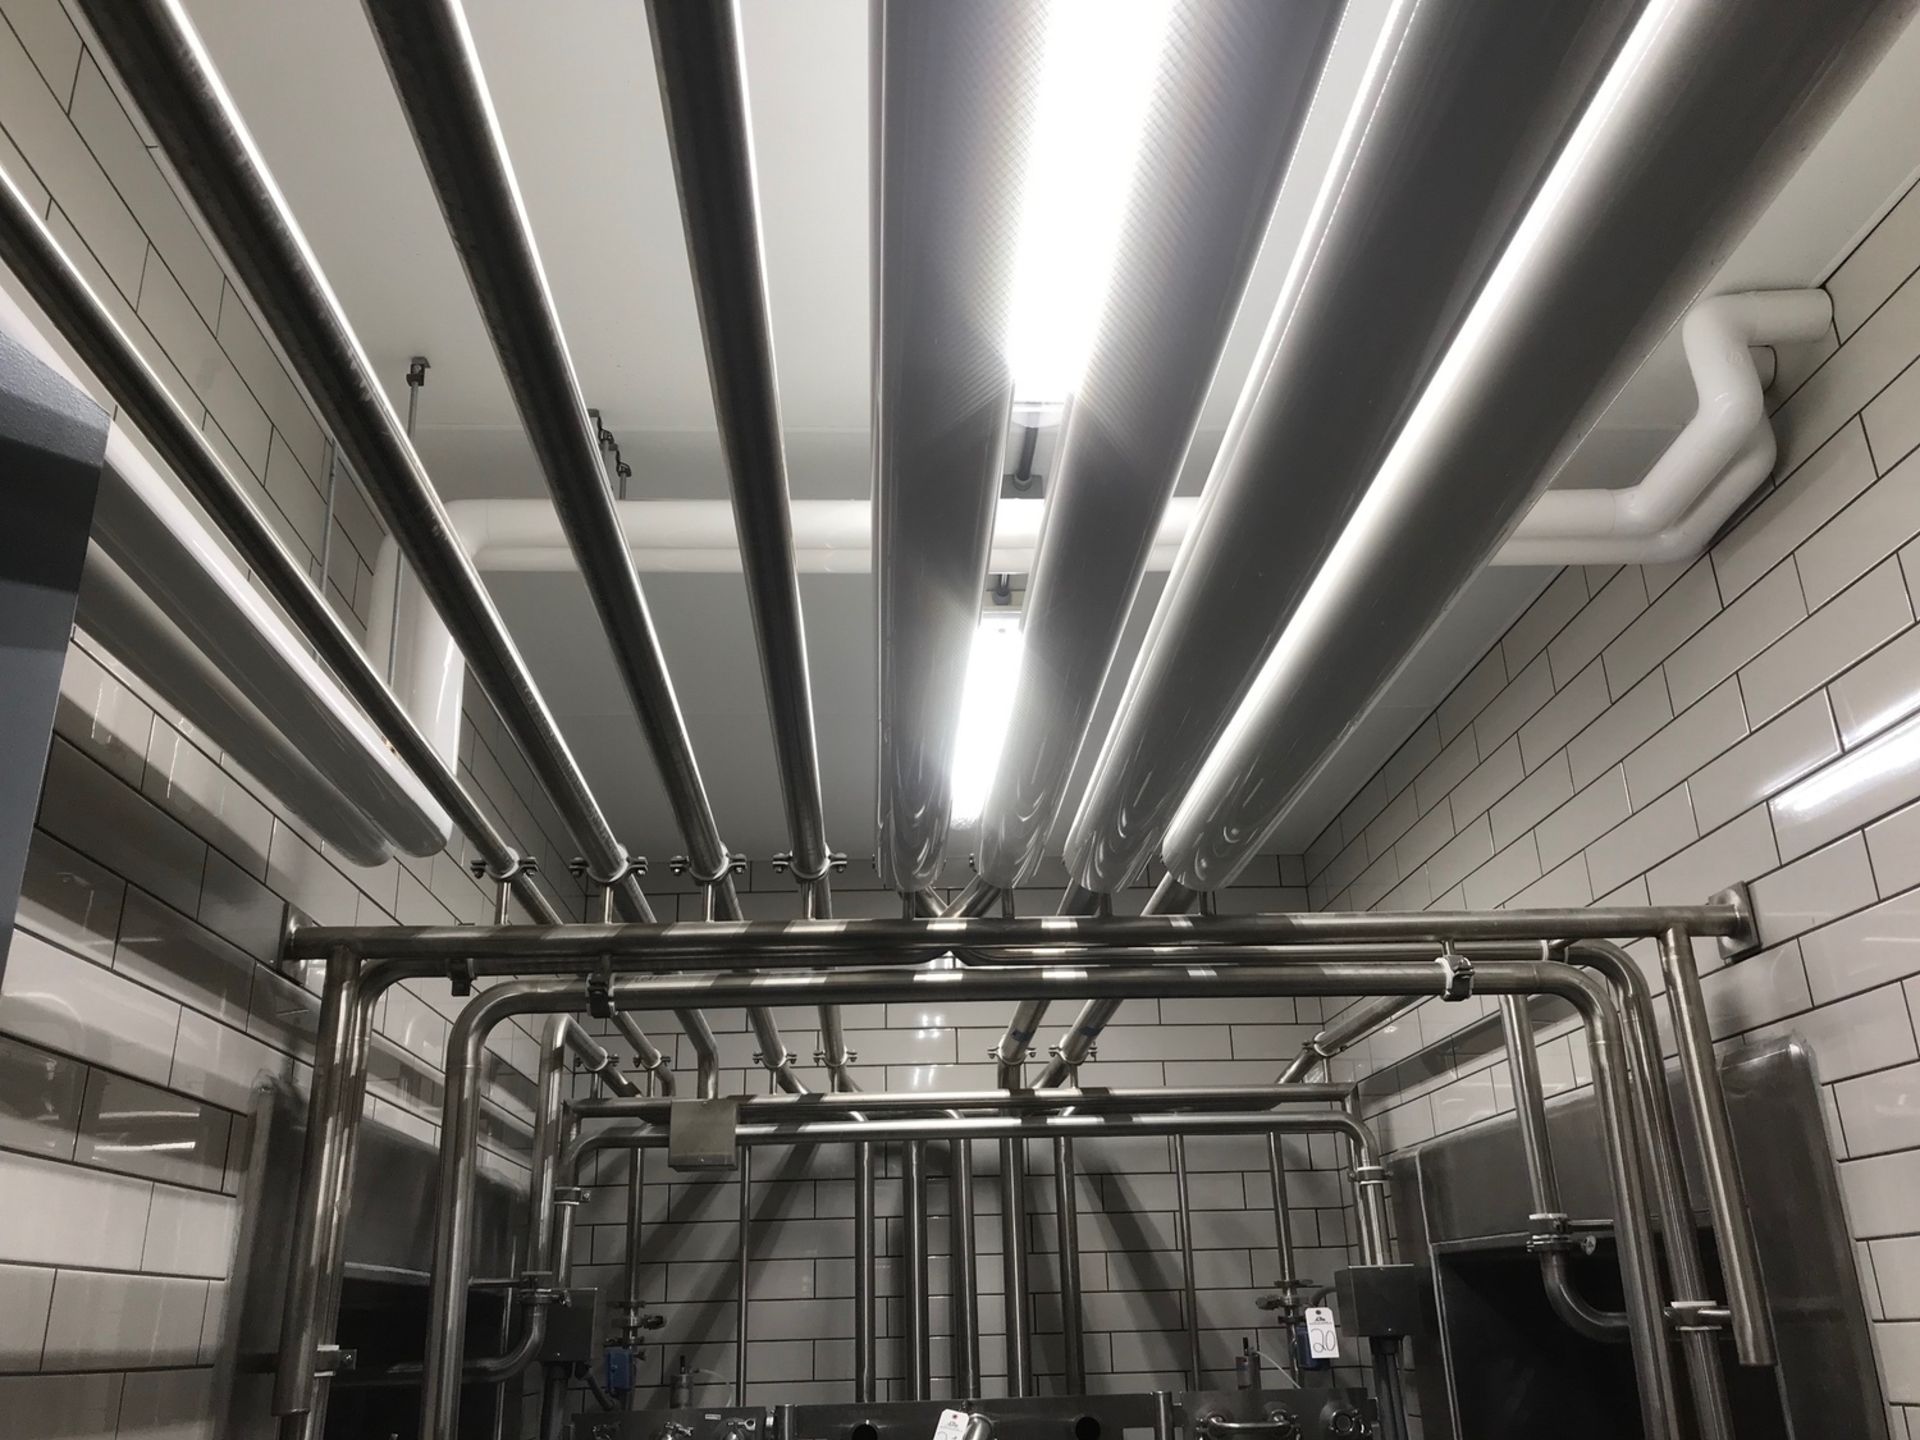 All Stainless Steel Pipe in Silo Alcove Area, Approximately 120 feet, 1.5", 2", 2.5"